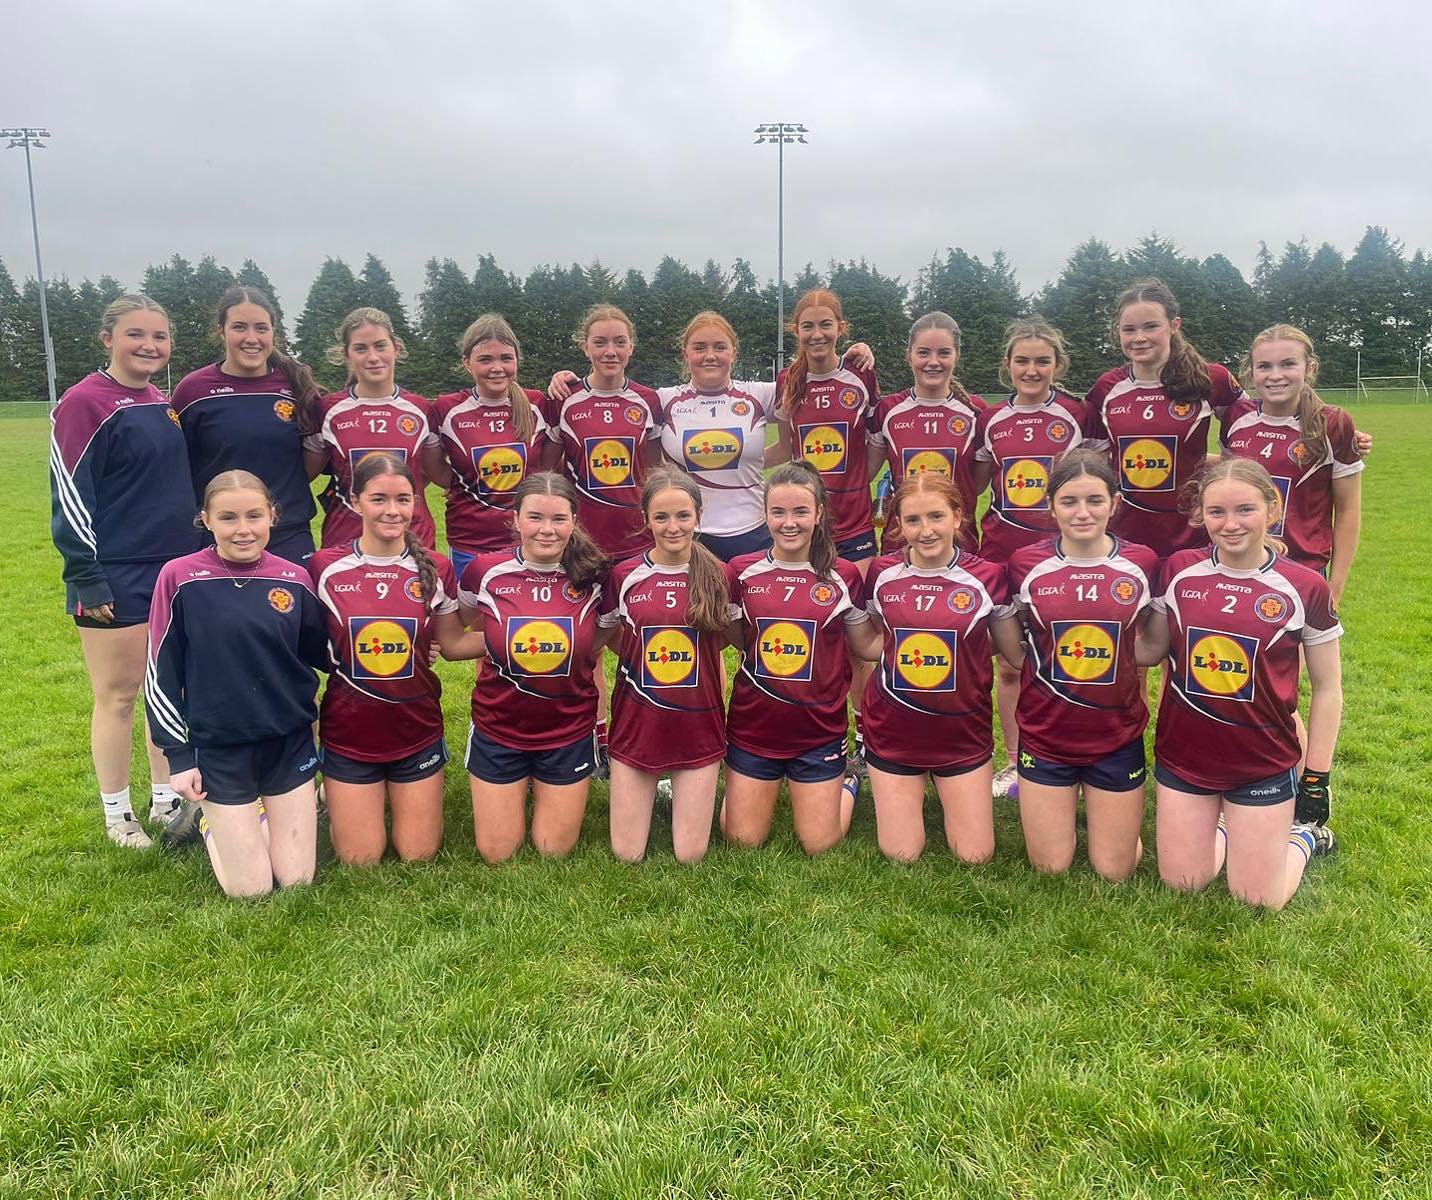 🙌🏻SENIOR FOOTBALL WIN 🙌🏻Well done to our senior football team who came out on top in what was a great battle with Glanmire Community college. We now look forward to a county final in the coming weeks. Well done girls #presab&uacute; 🏐🇱🇻